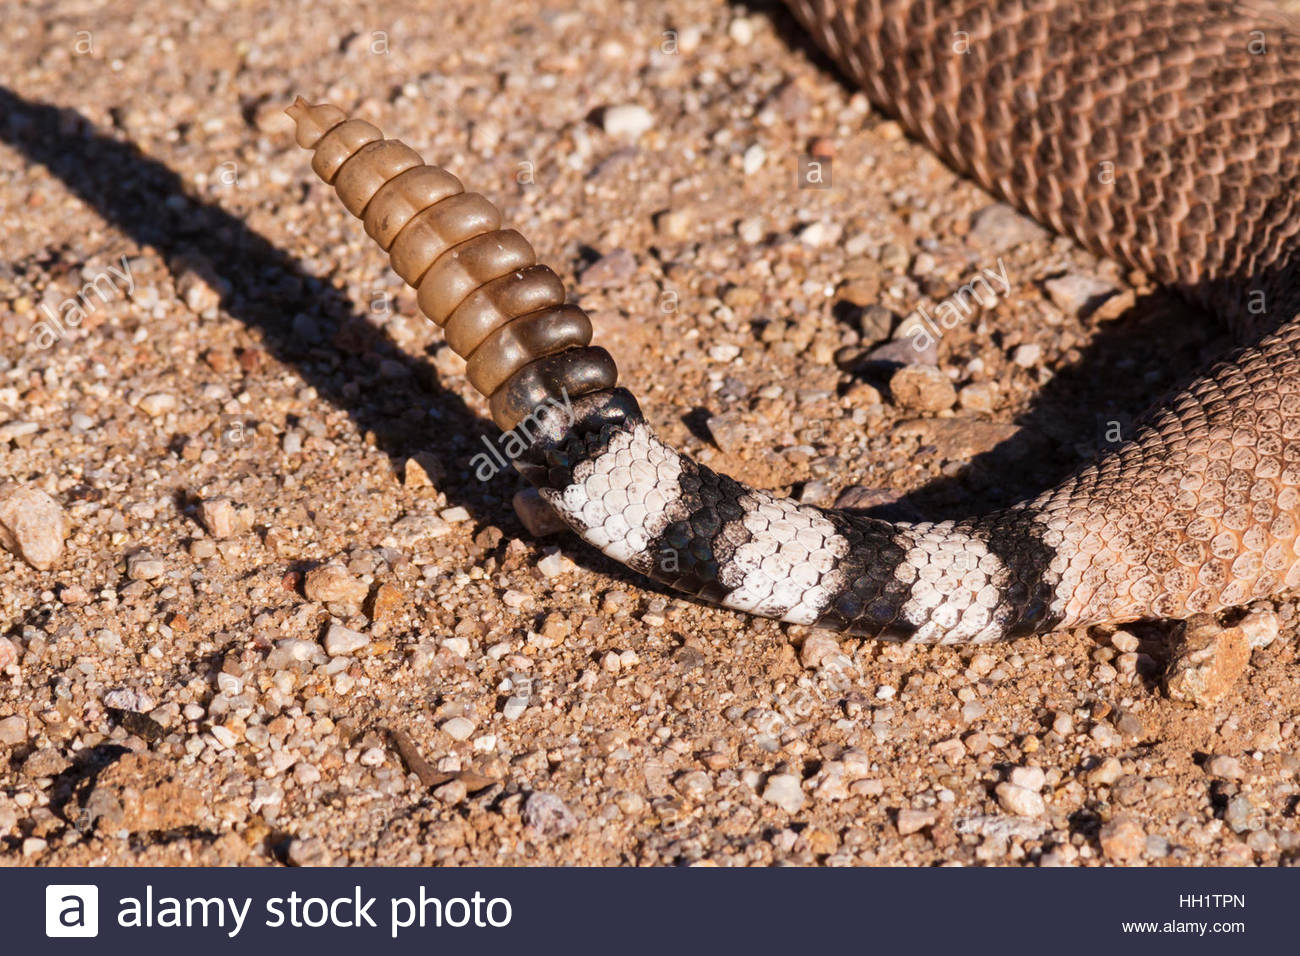 western-diamond-backed-rattlesnake-crotalus-atrox-detail-of-tail-and-HH1TPN.jpg